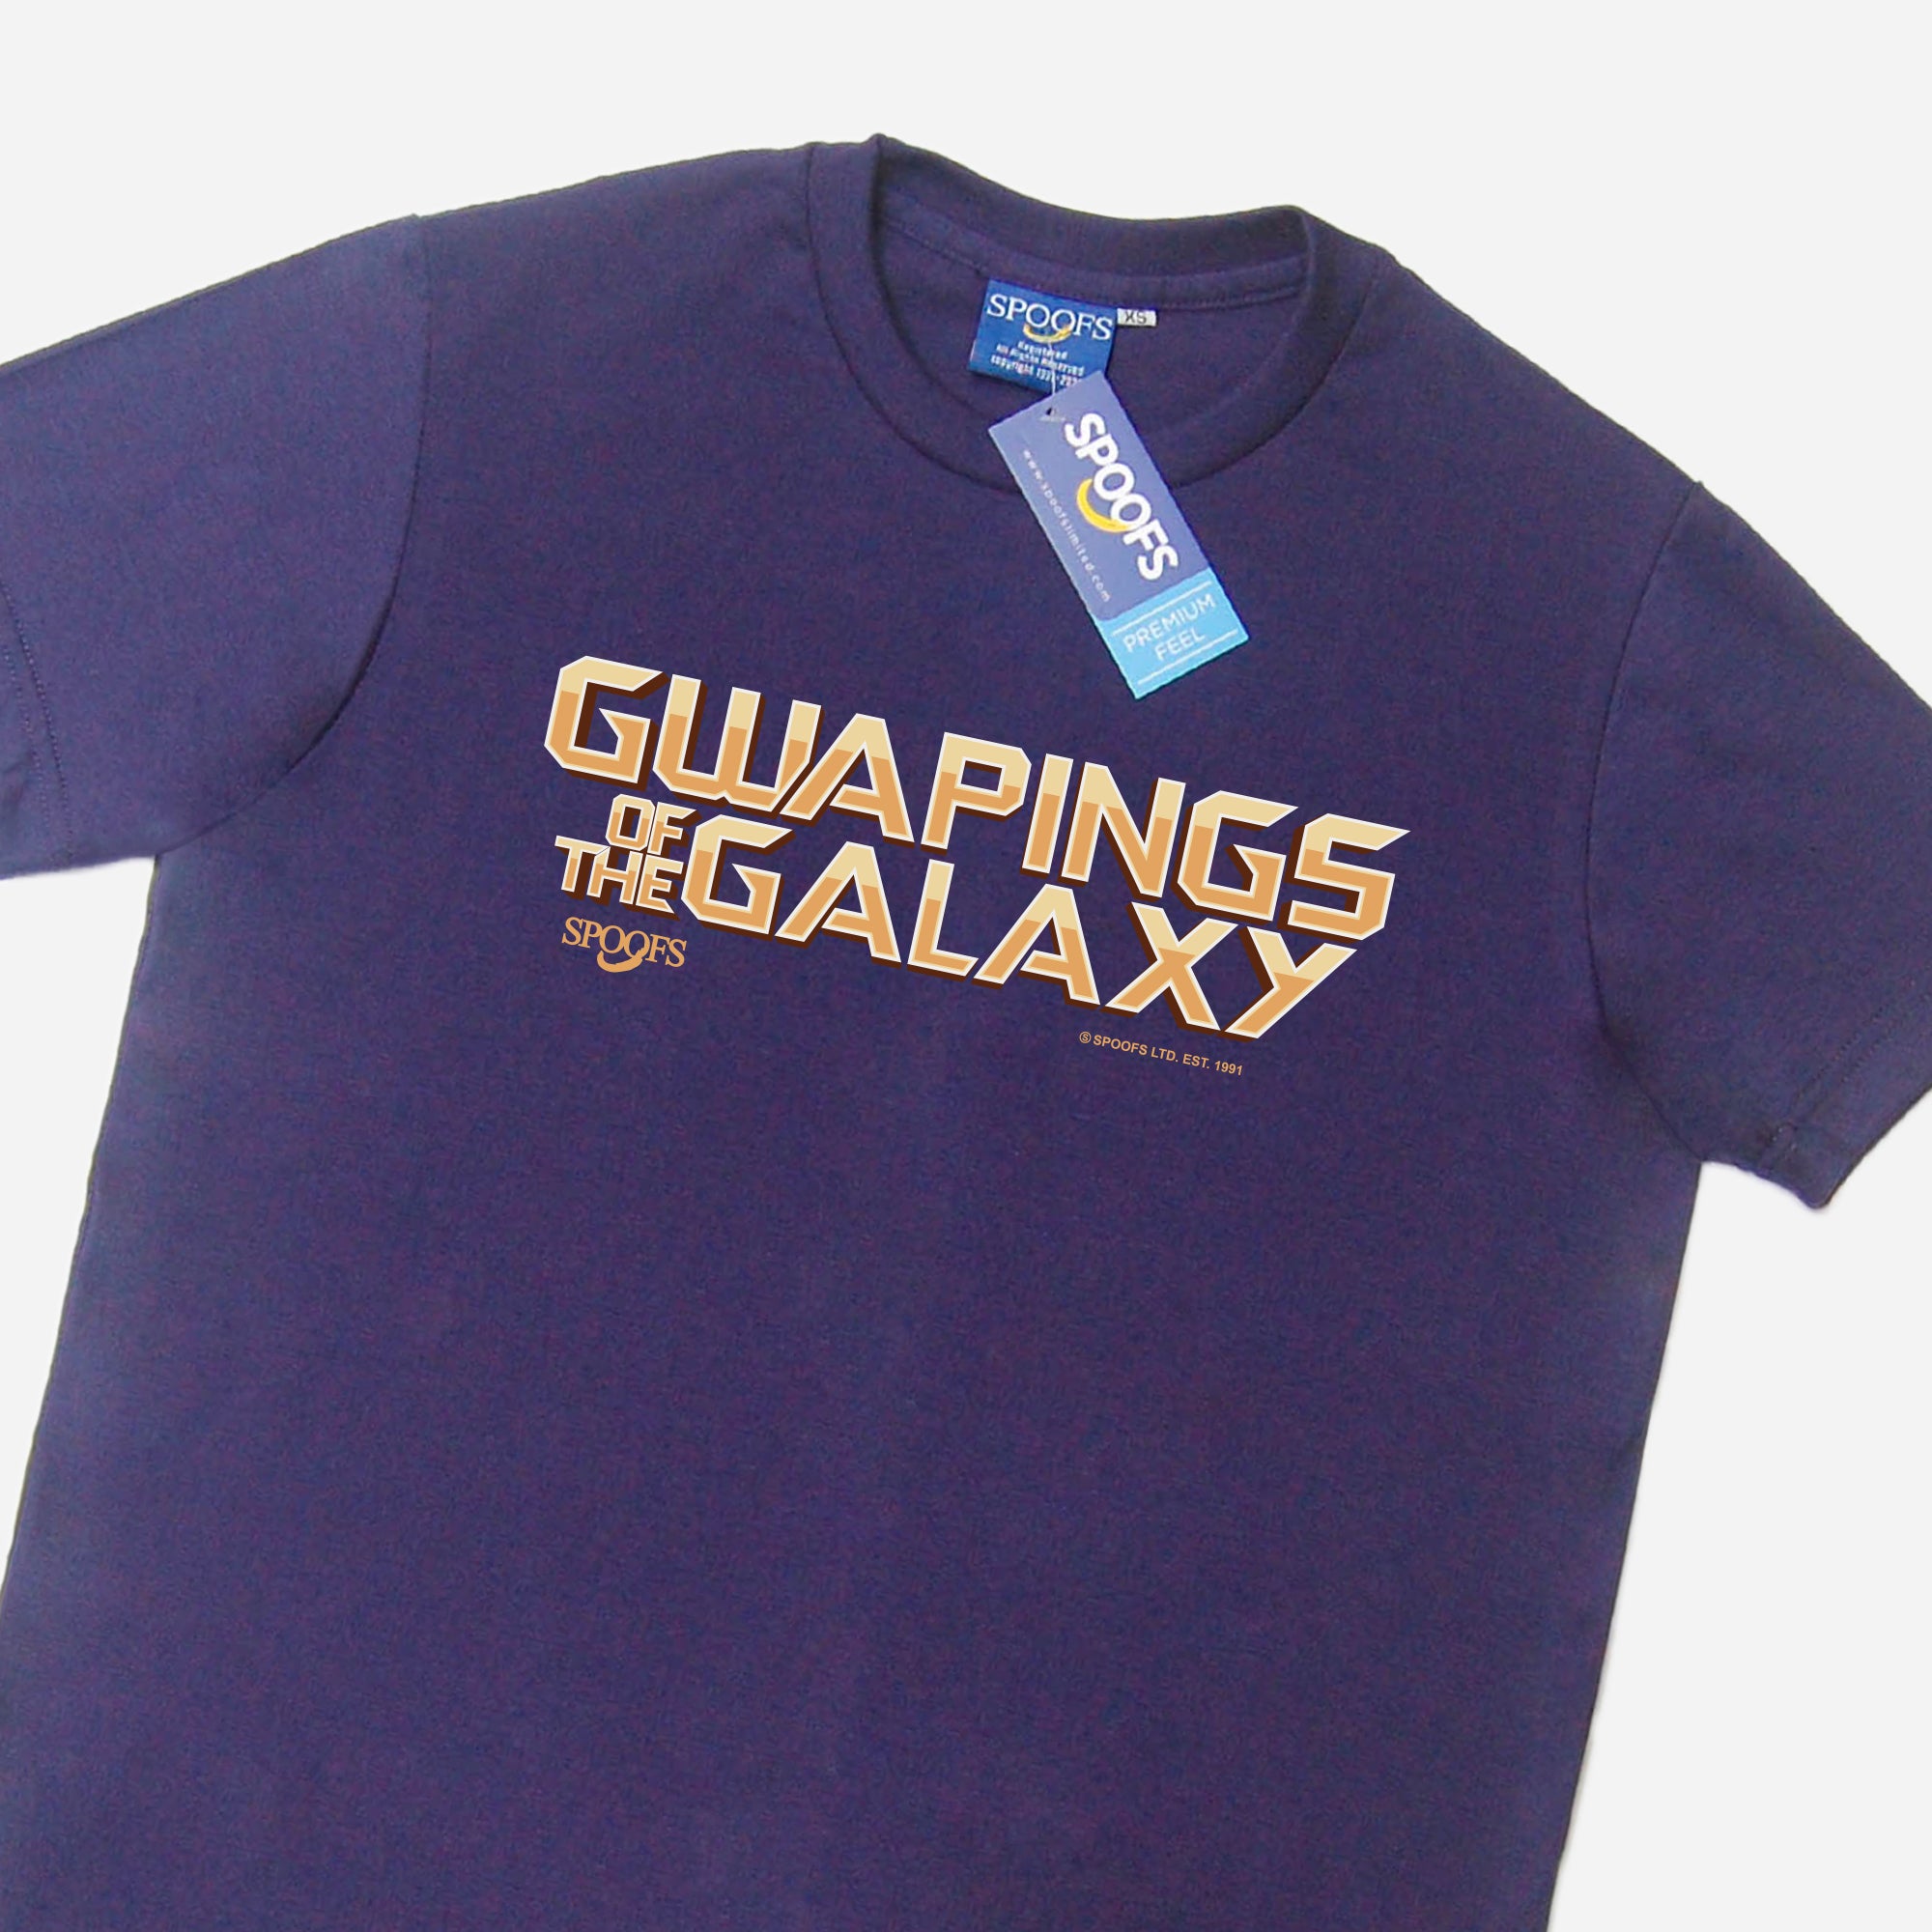 Gwapings of the Galaxy (Navy Blue)